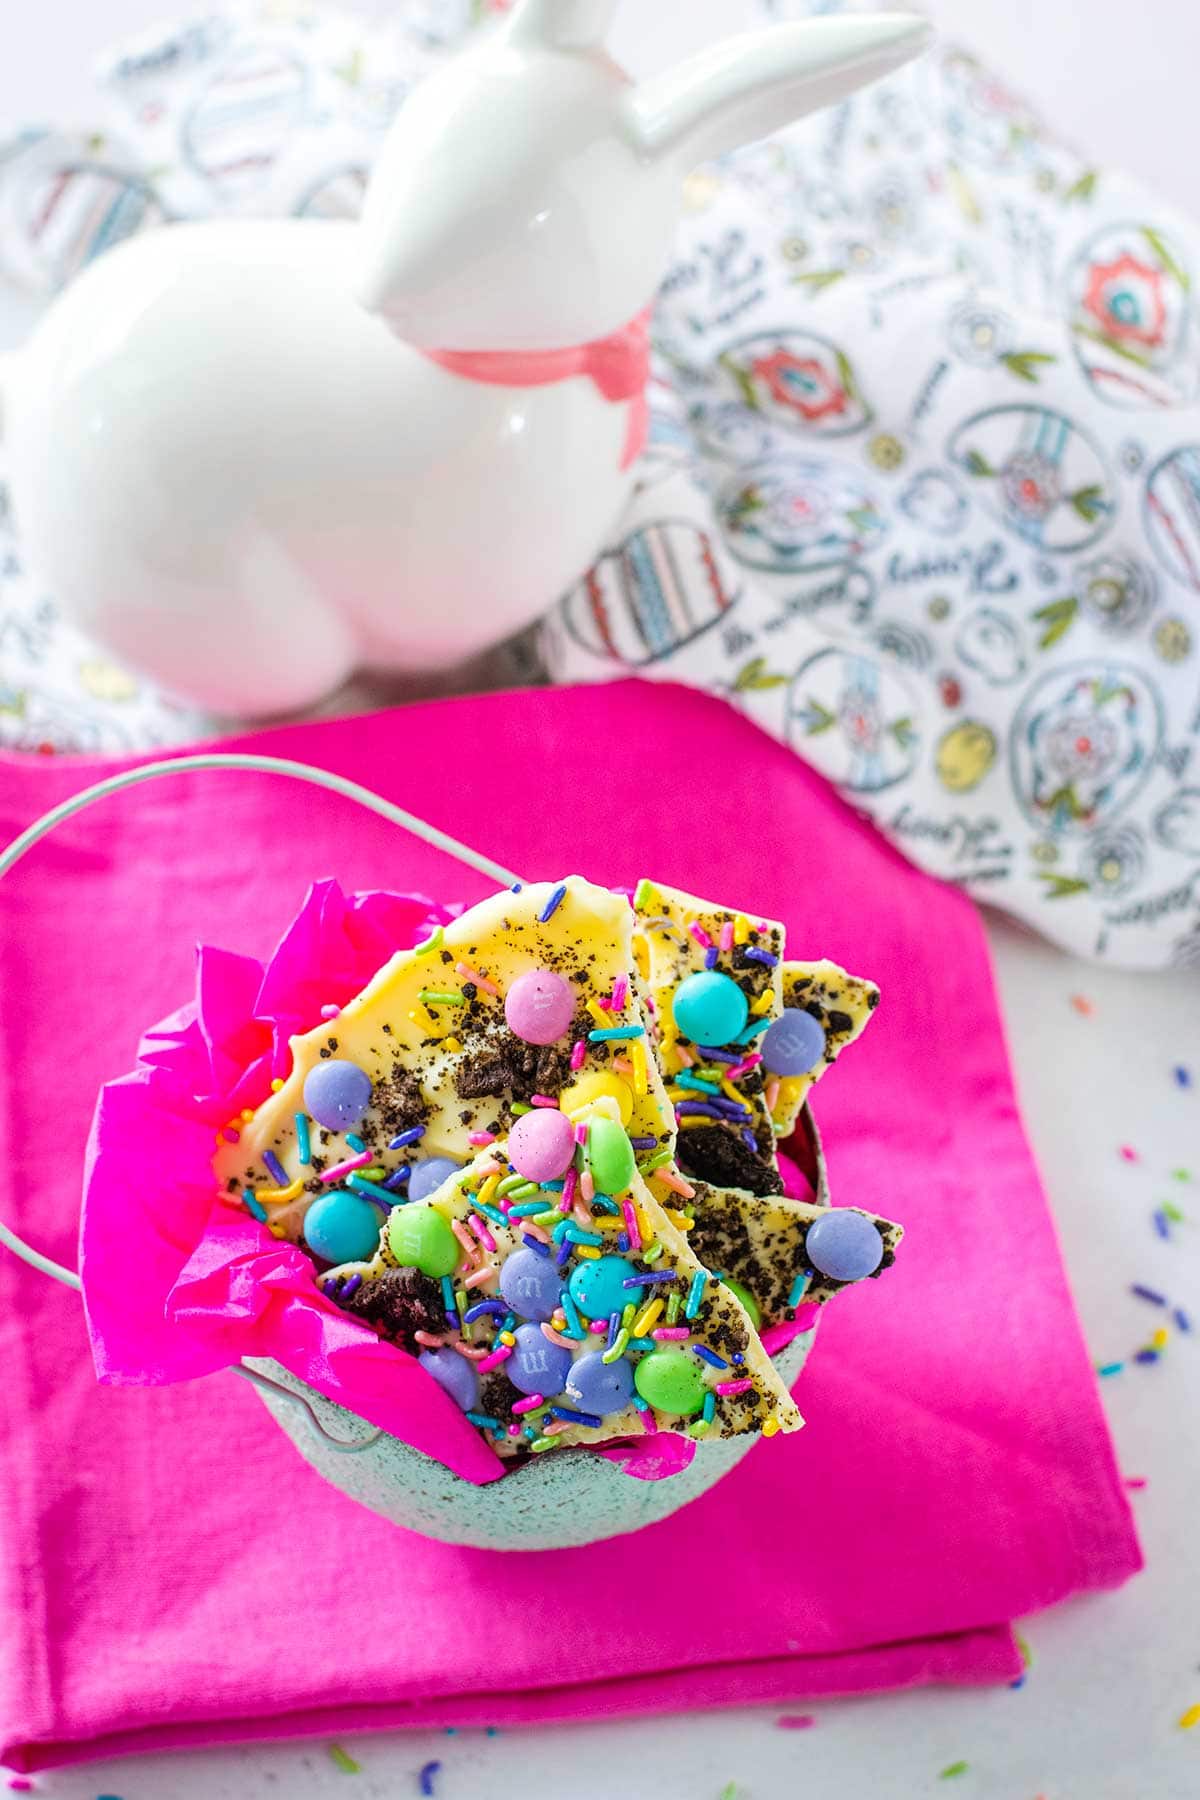 White Chocolate Oreo bark in an egg-shaped bowl on a pink table cloth.